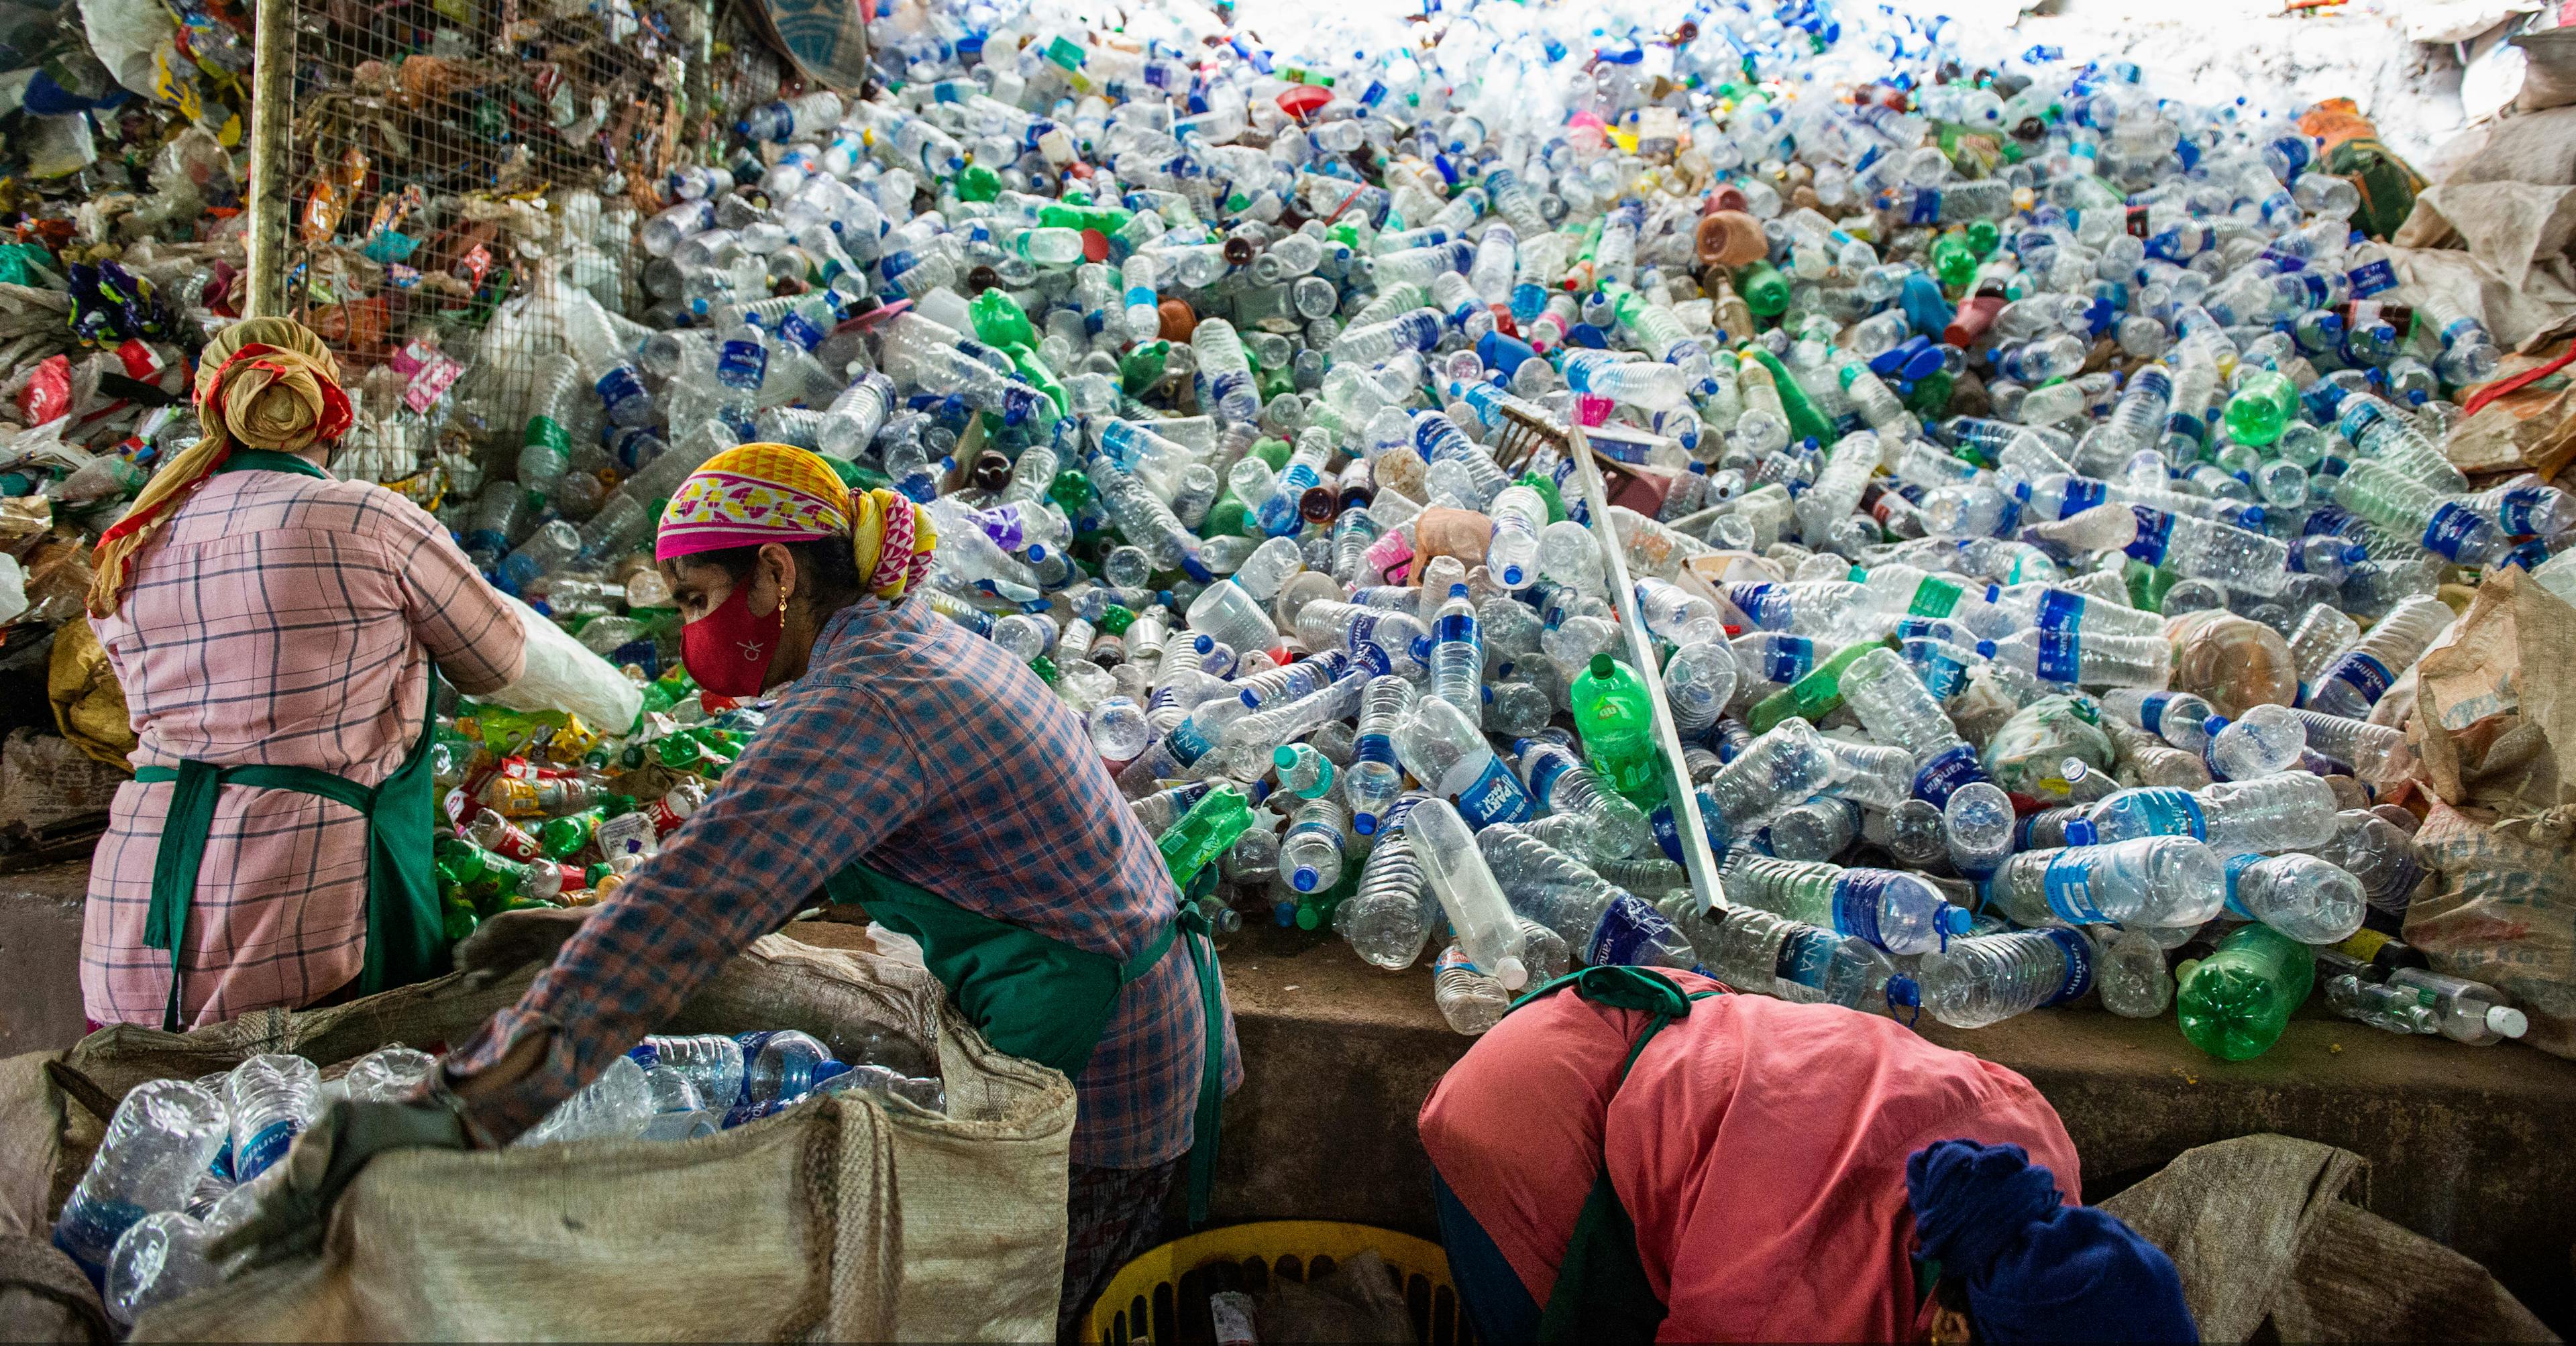 Two women are seen sitting on the lower right at the edge of a literal mountain of empty plastic bottles.